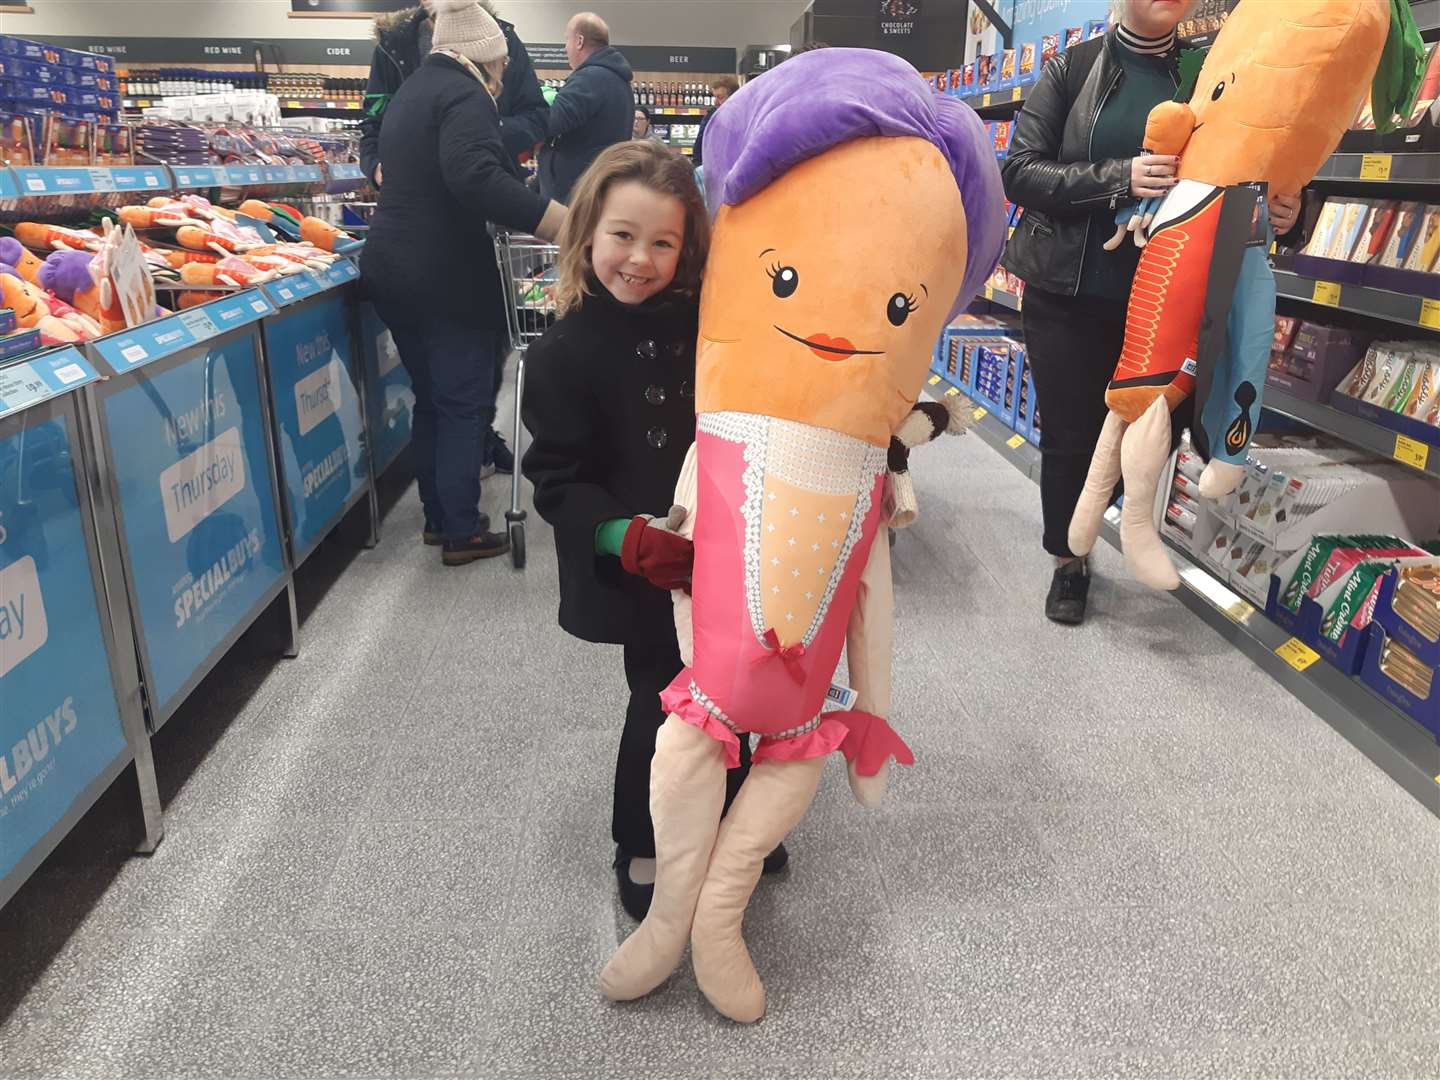 Six-year-old Oceanna Broadhurst with her giant Katie the Carrot